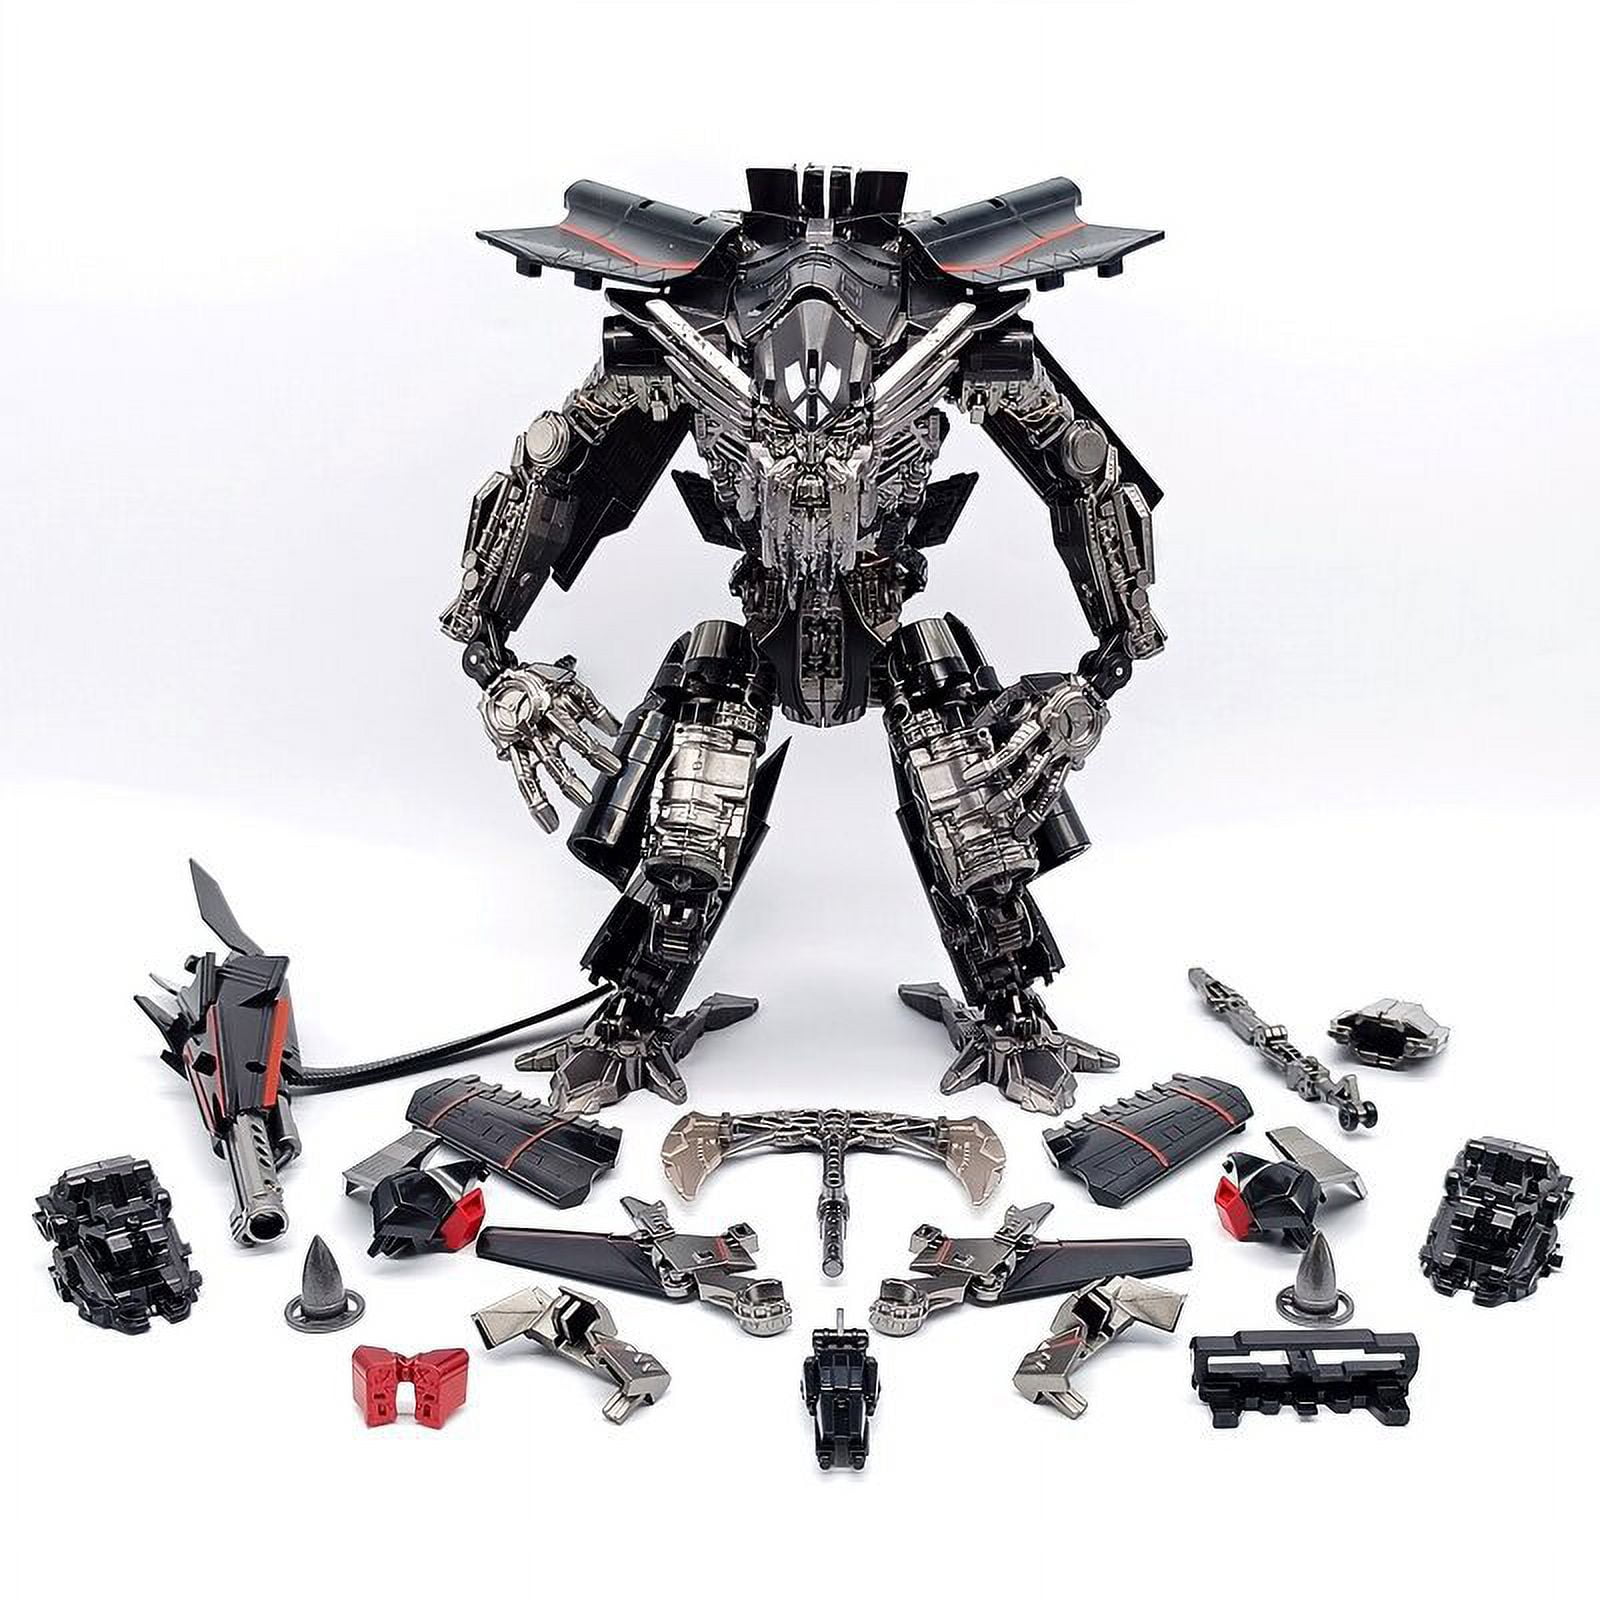 Transformers Tank Megatron 7-Inch Action Figure Model Toy